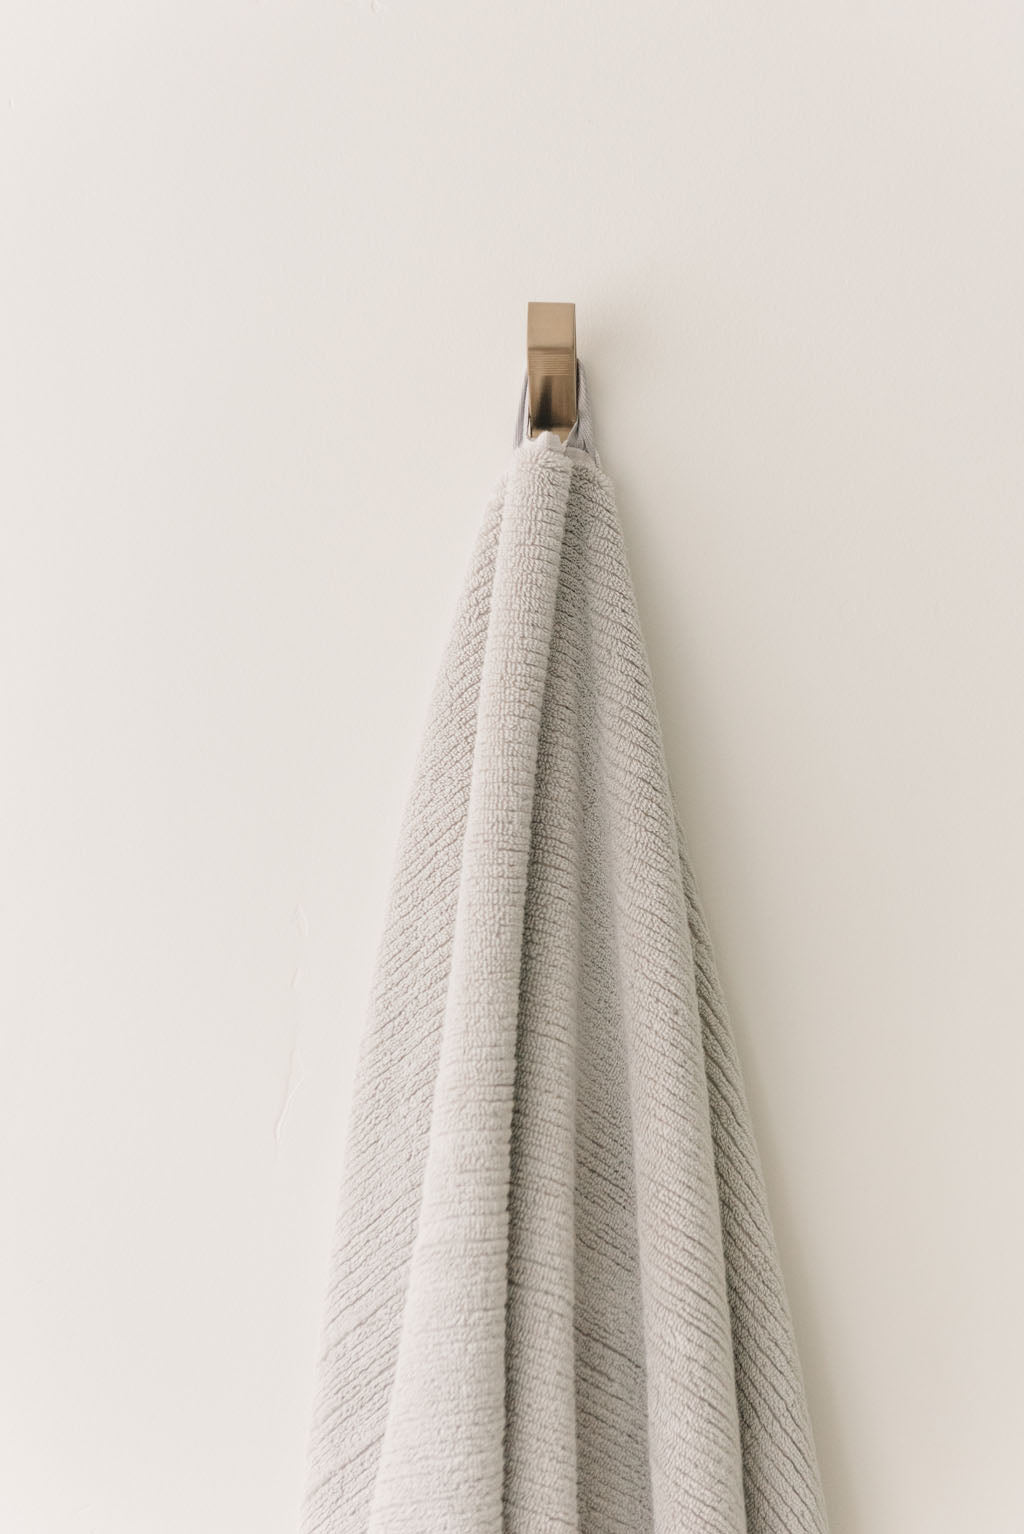 Ribbed Terry Bath Towel in the color Light Grey. Photo of Ribbed Terry Bath Towel taken as the Light Grey Ribbed Terry Bath Towel is hanging from a towel hook in a bathroom. 